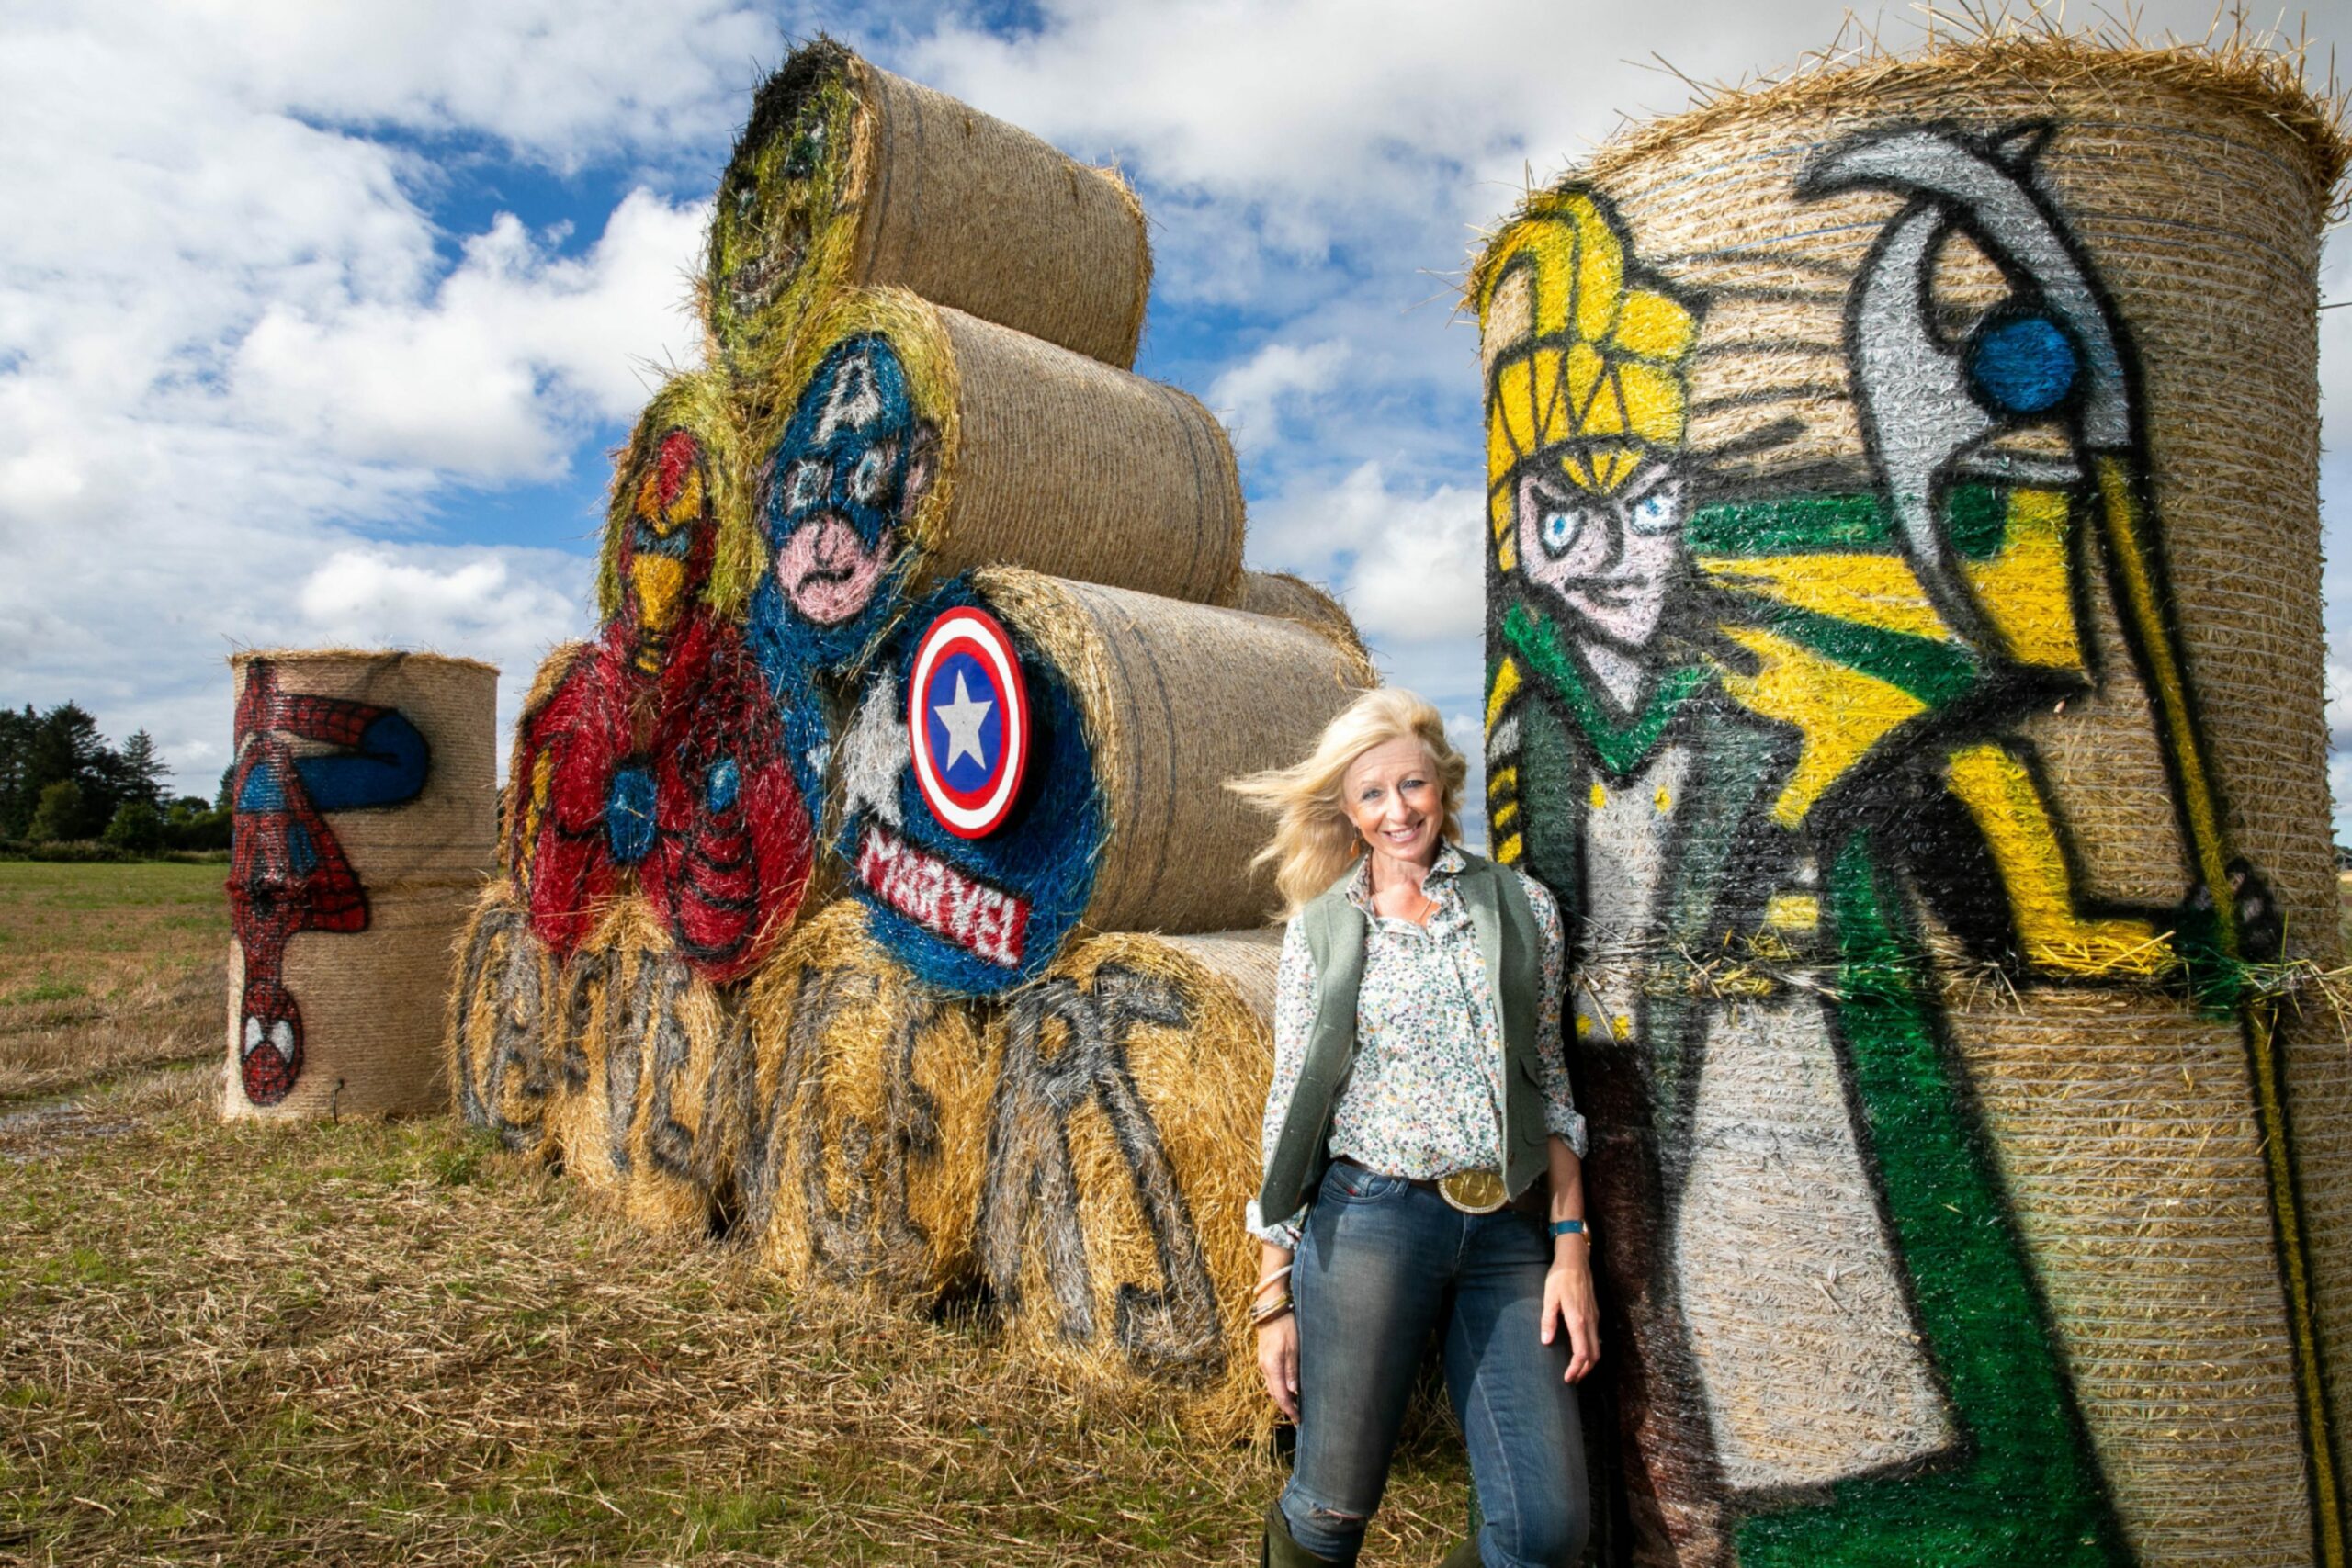 Artist Fleur 'Balesy' Baxter at her recent creation of characters from The Avengers to help raise funds for Cancer Research.